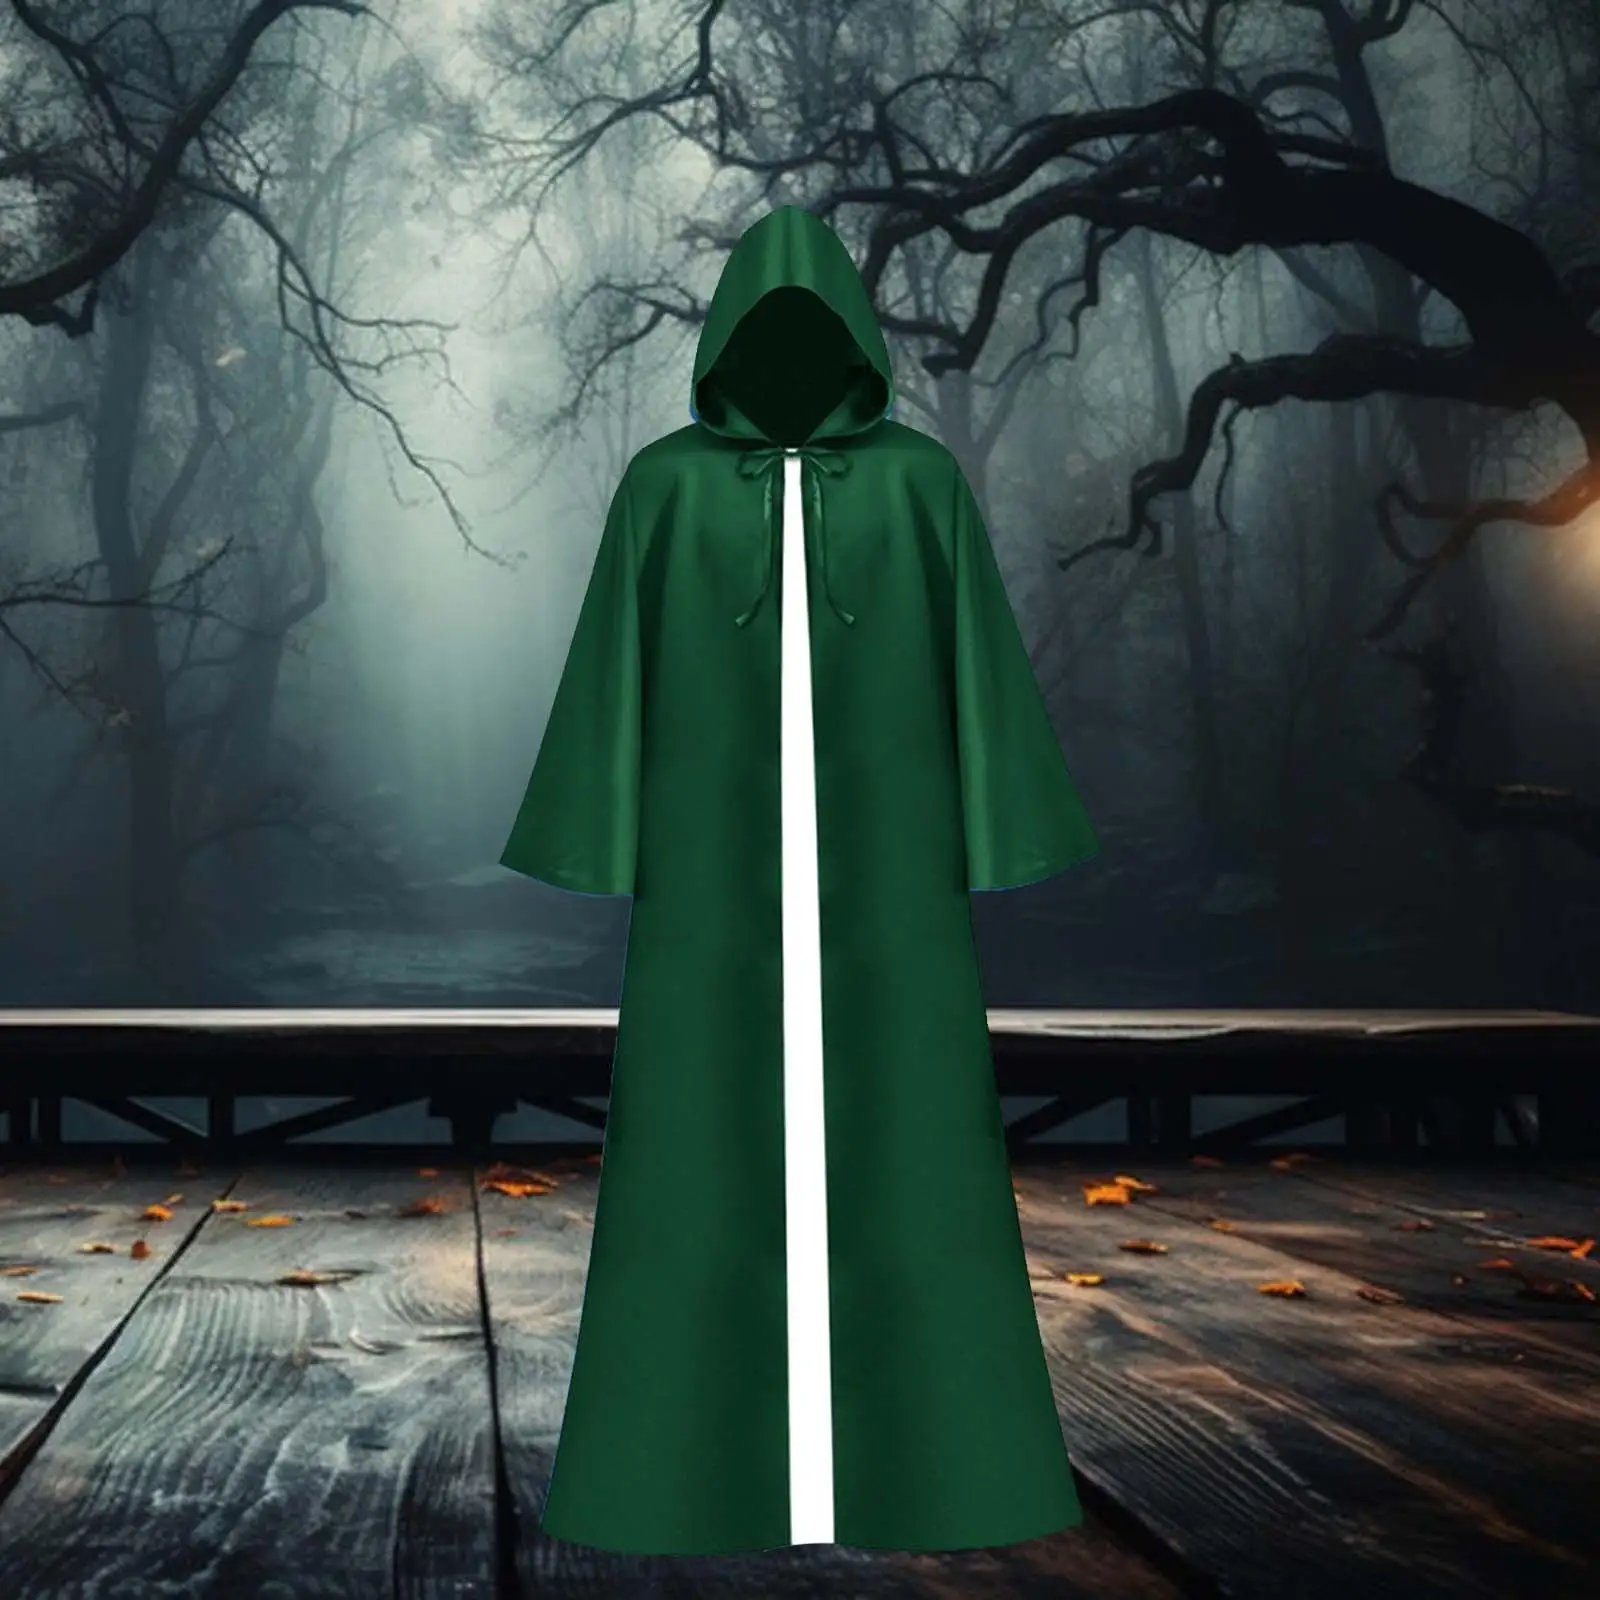 Halloween Hooded Cloak Cosplay Cape Full Length Witch Costume Long Hooded Cloak Robe for Vintage Gathering Carnival